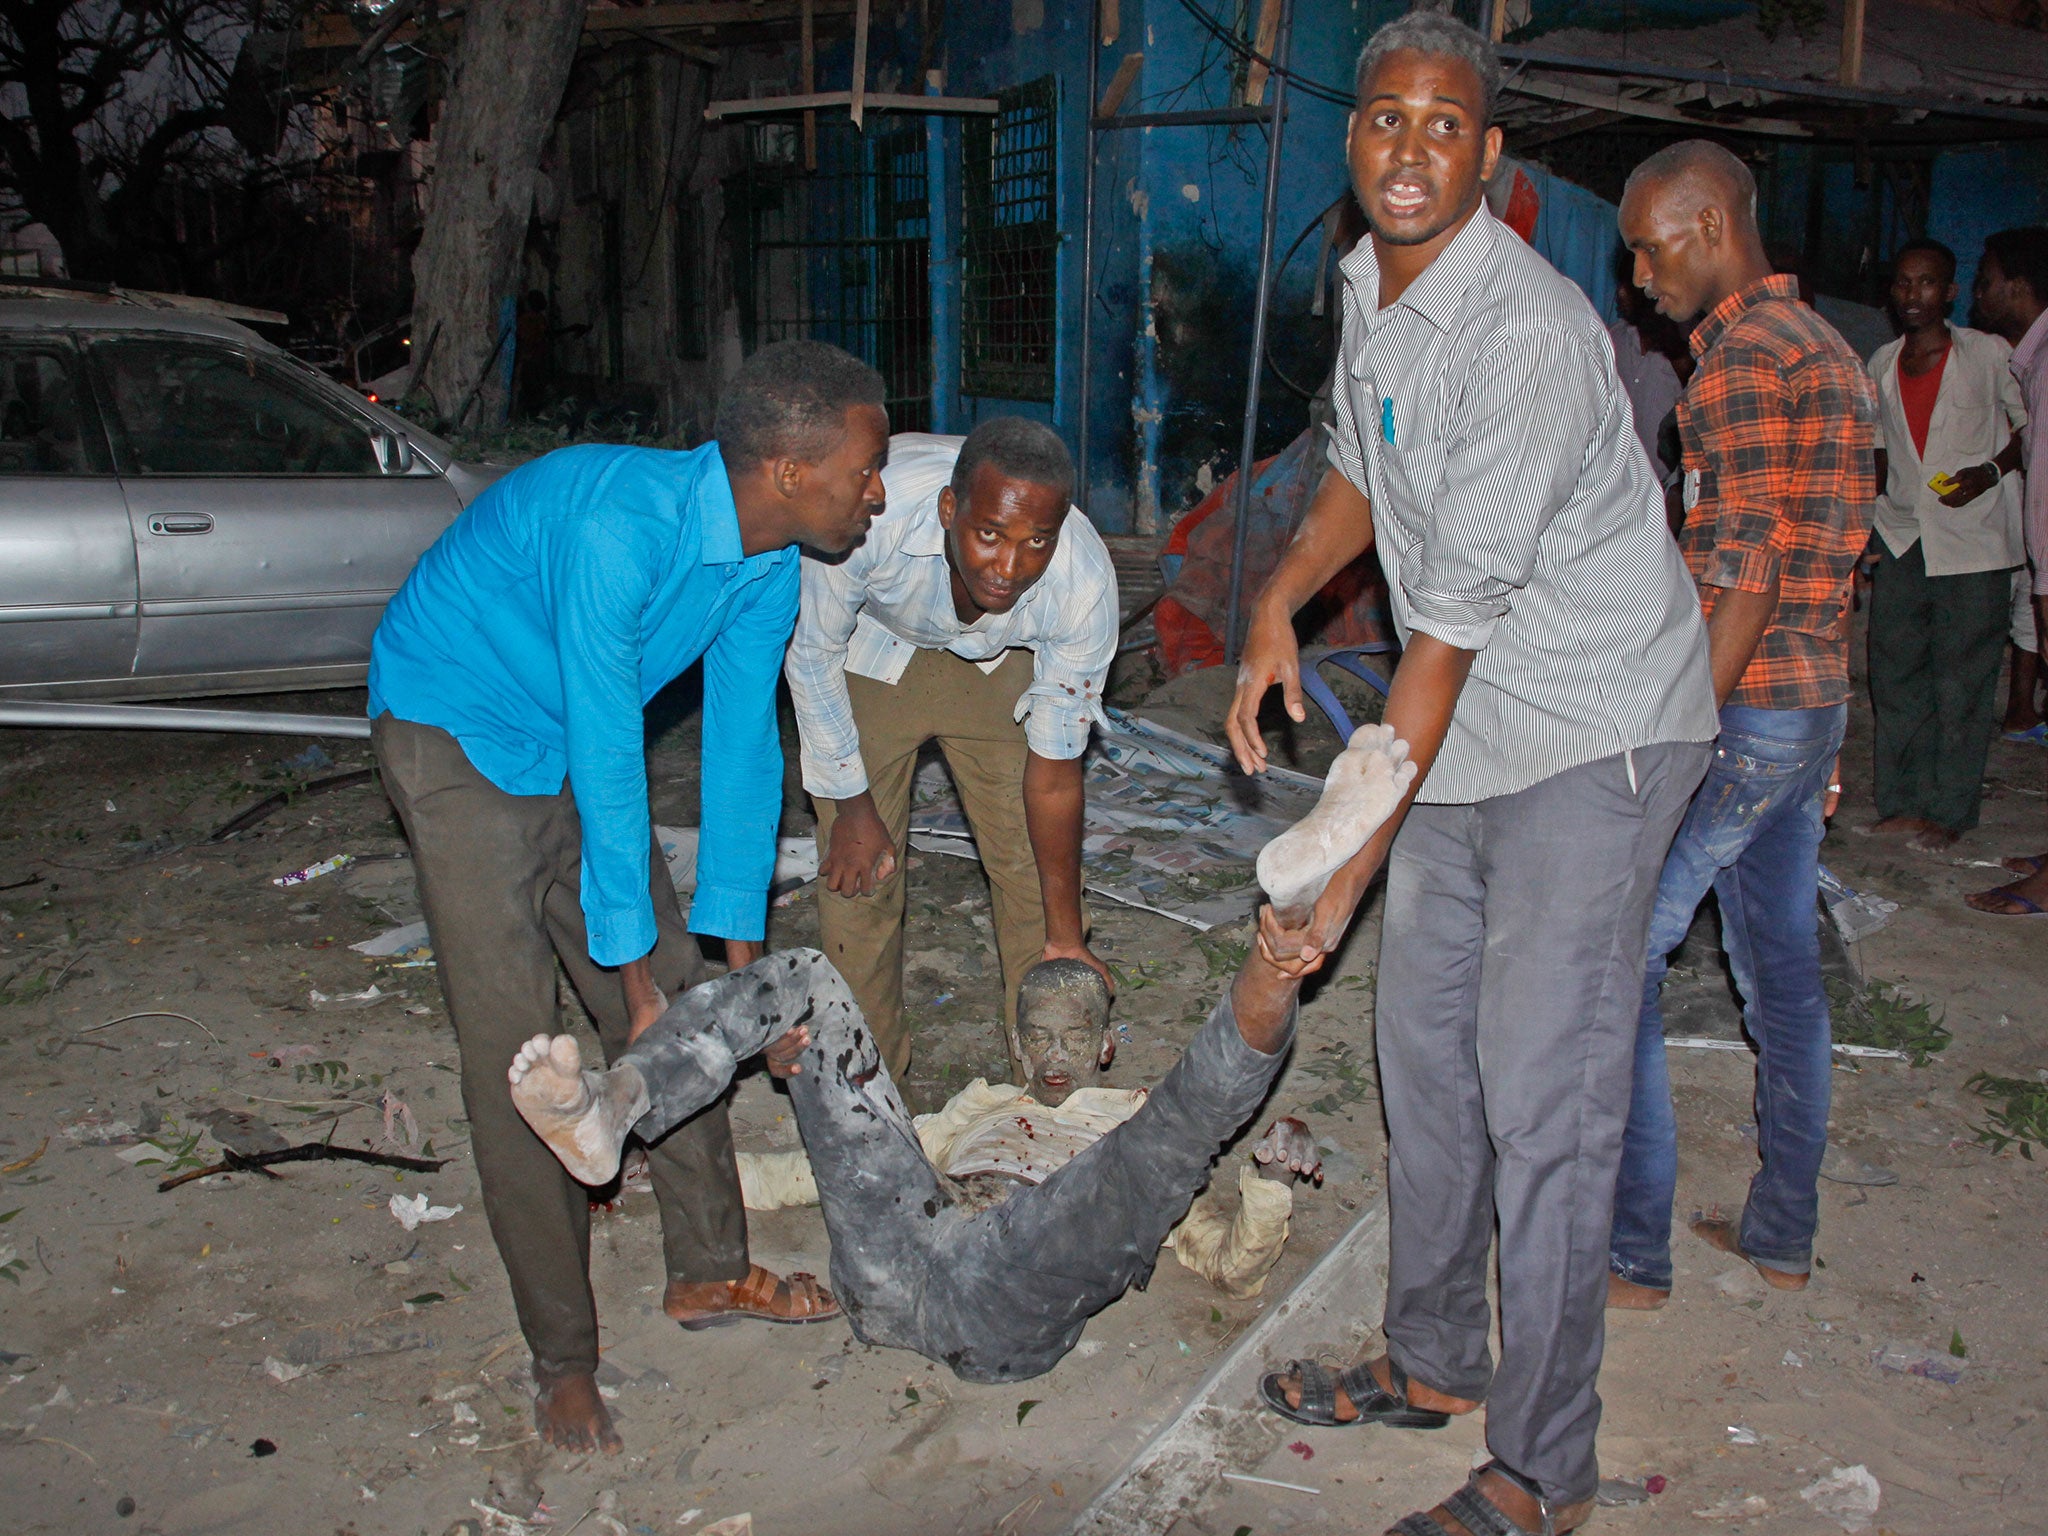 Somali men carry a wounded civilian who was injured in a bomb attack on an hotel in Mogadishu, Somalia, on 1 June 2016